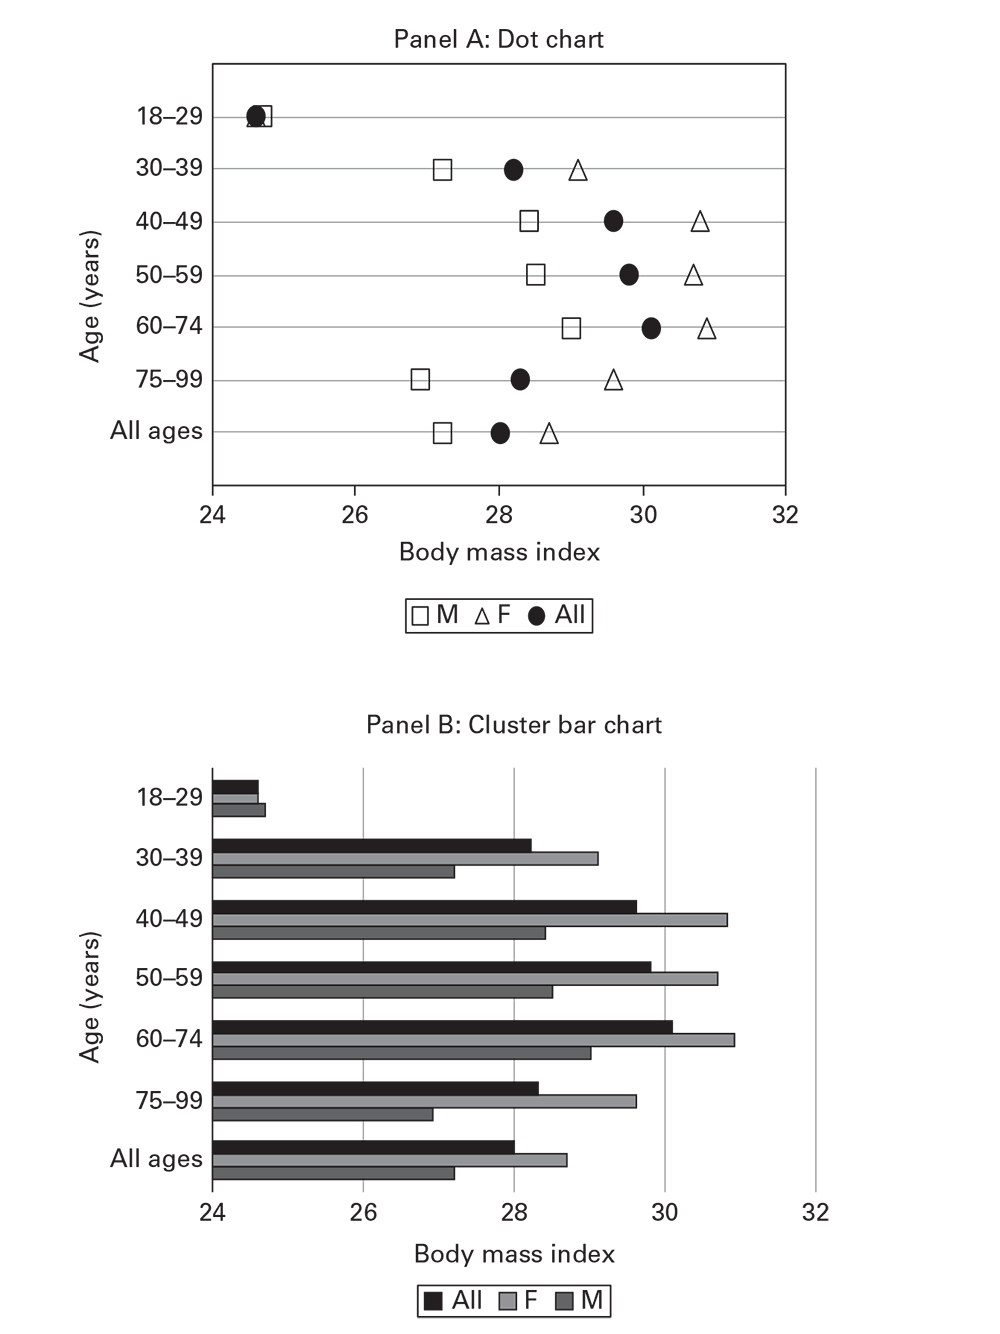 Dot chart (A) and bar chart (B) comparison of mean body mass index among adults, by age group and sex: Ajloun and Jerash Governorates, Jordan, 2012.